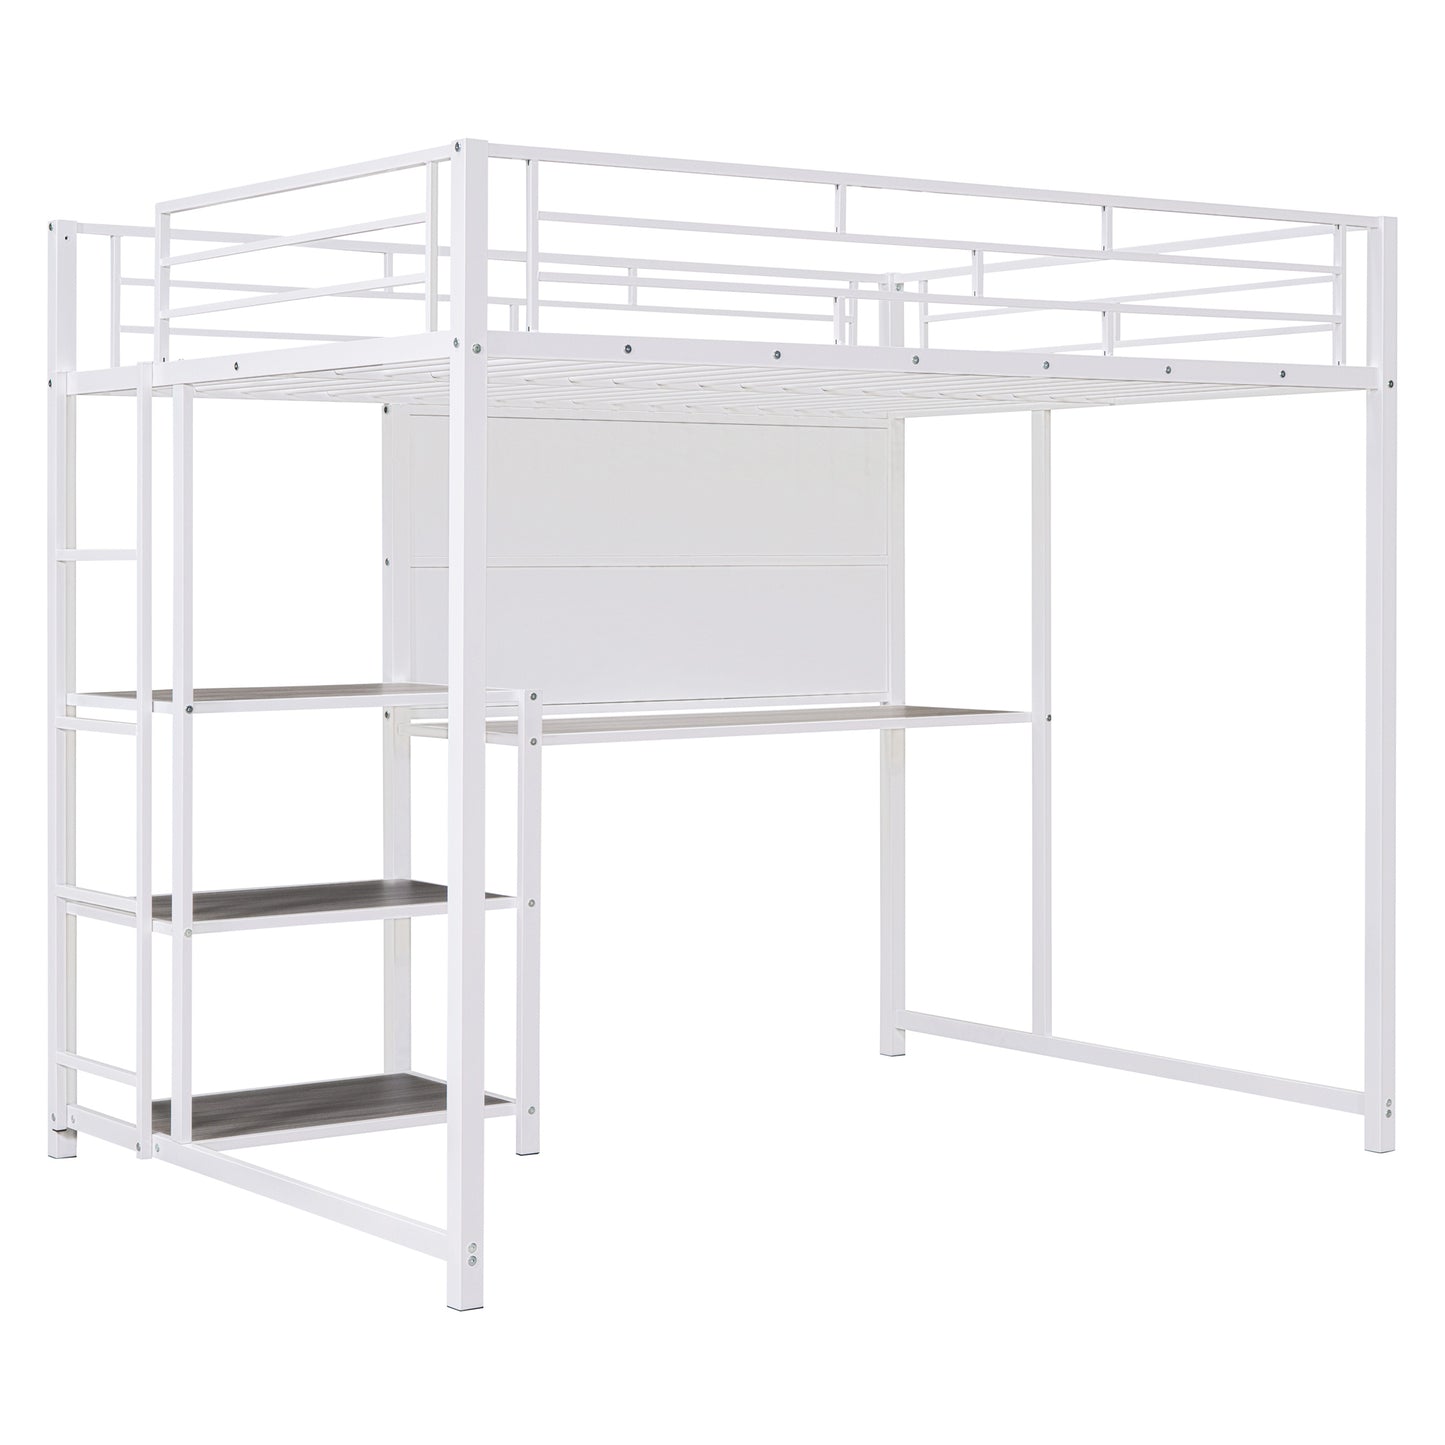 Full Size Loft Bed with Desk and Whiteboard, Metal Loft Bed with 3 Shelves and Ladder, White